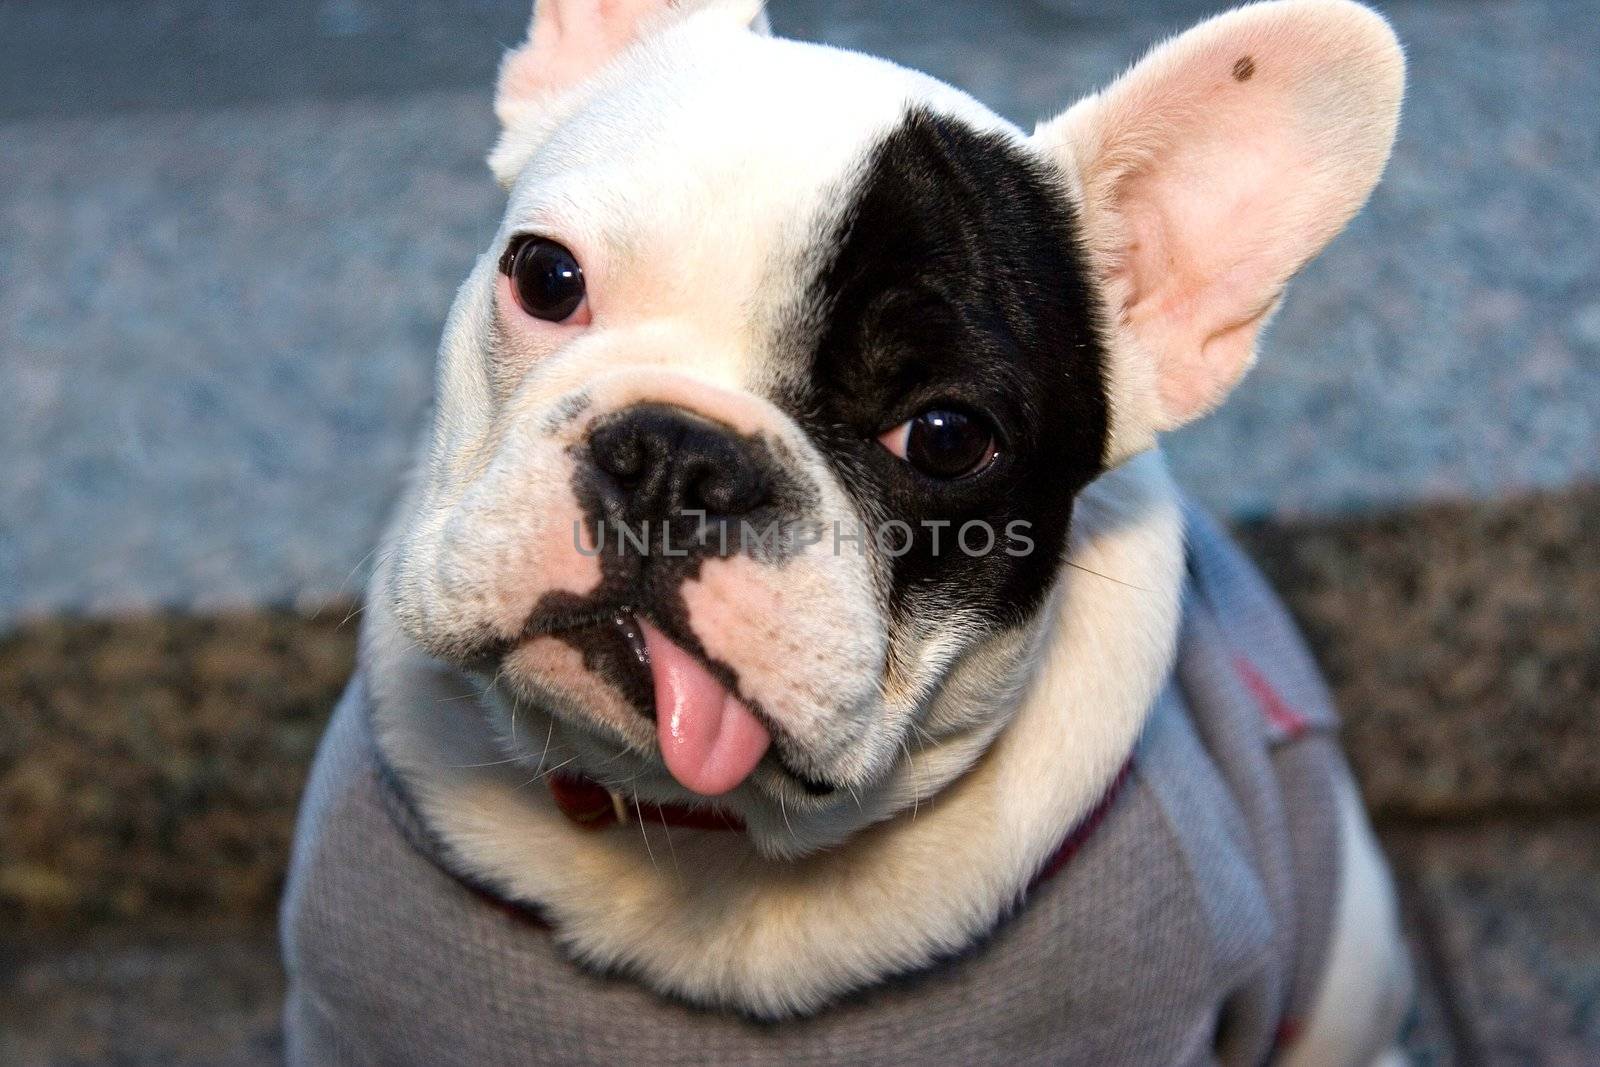 Cute white with black eye French Bulldog sitting, tilting its head and having his tongue hanging out.